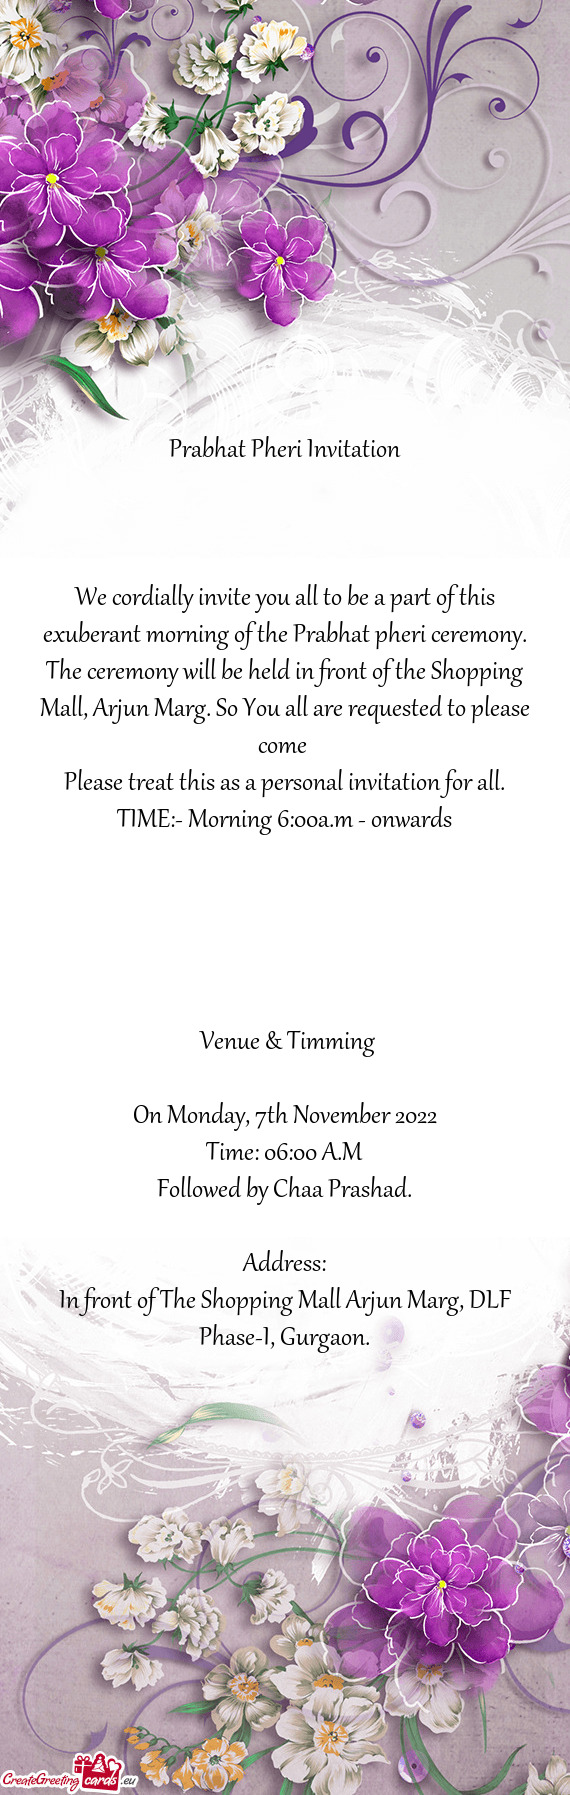 We cordially invite you all to be a part of this exuberant morning of the Prabhat pheri ceremony. Th